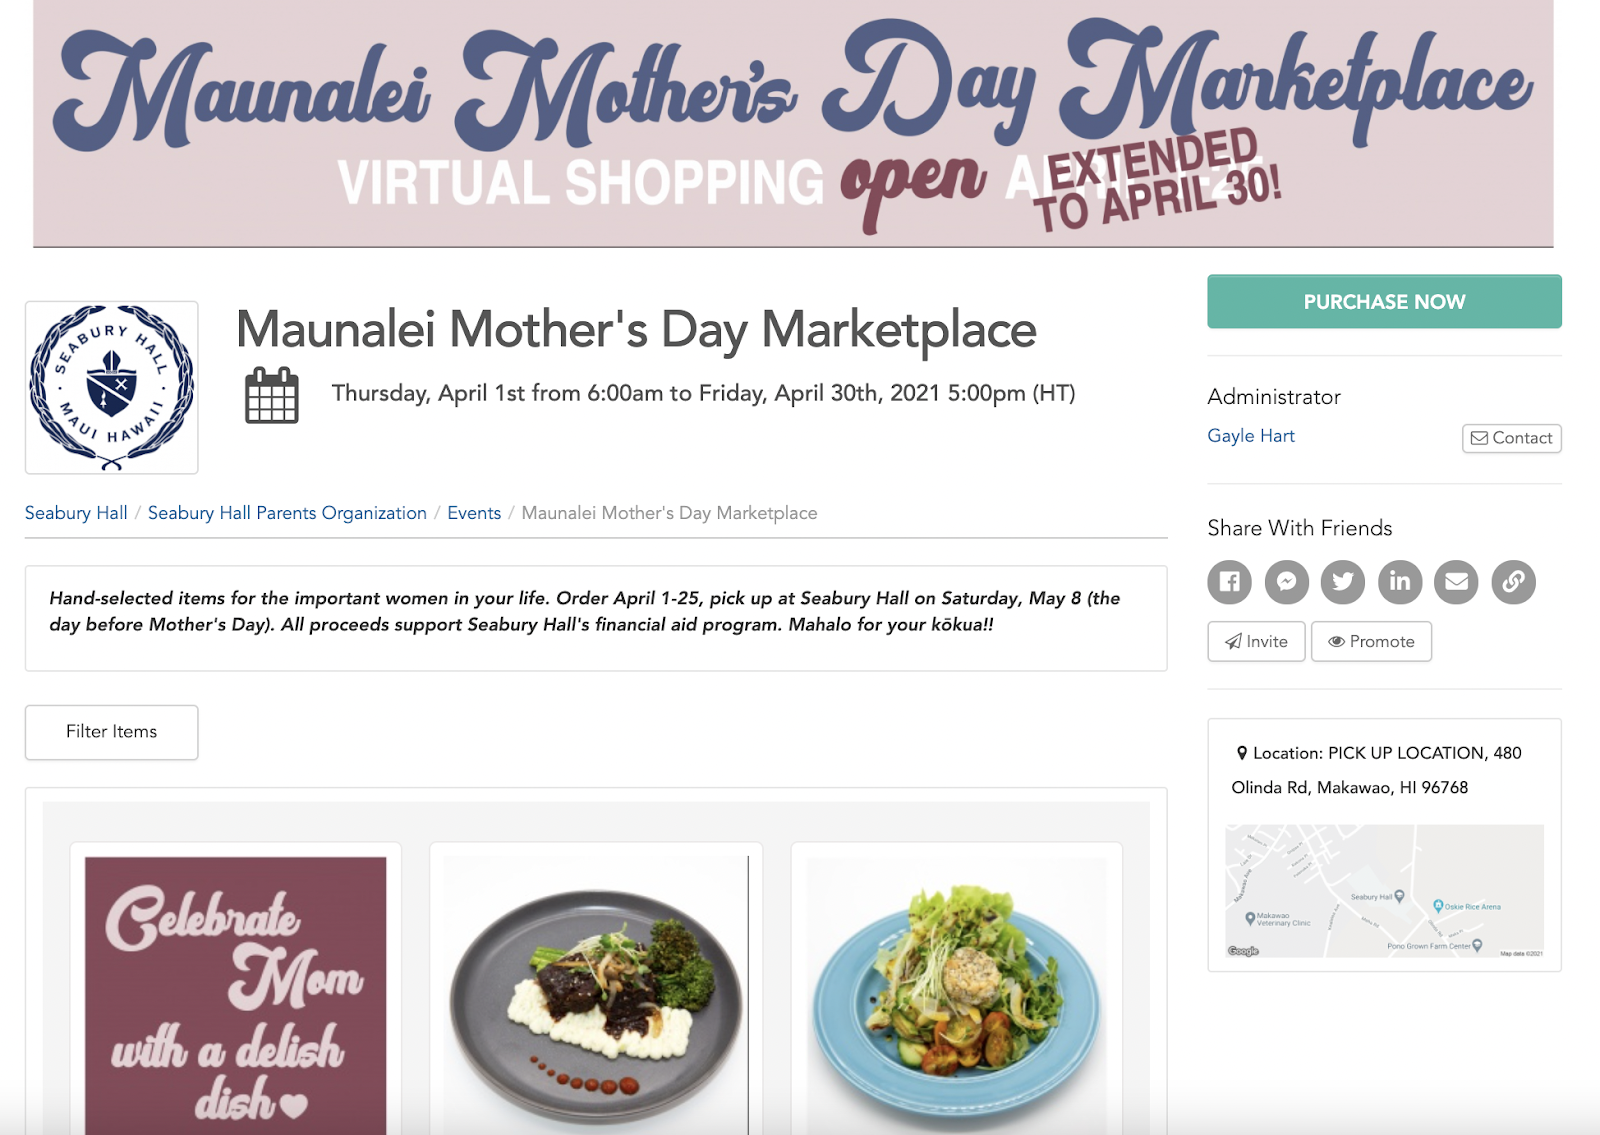 Maunalei Mother's Day Marketplace to support Seabury Hall's financial aid program